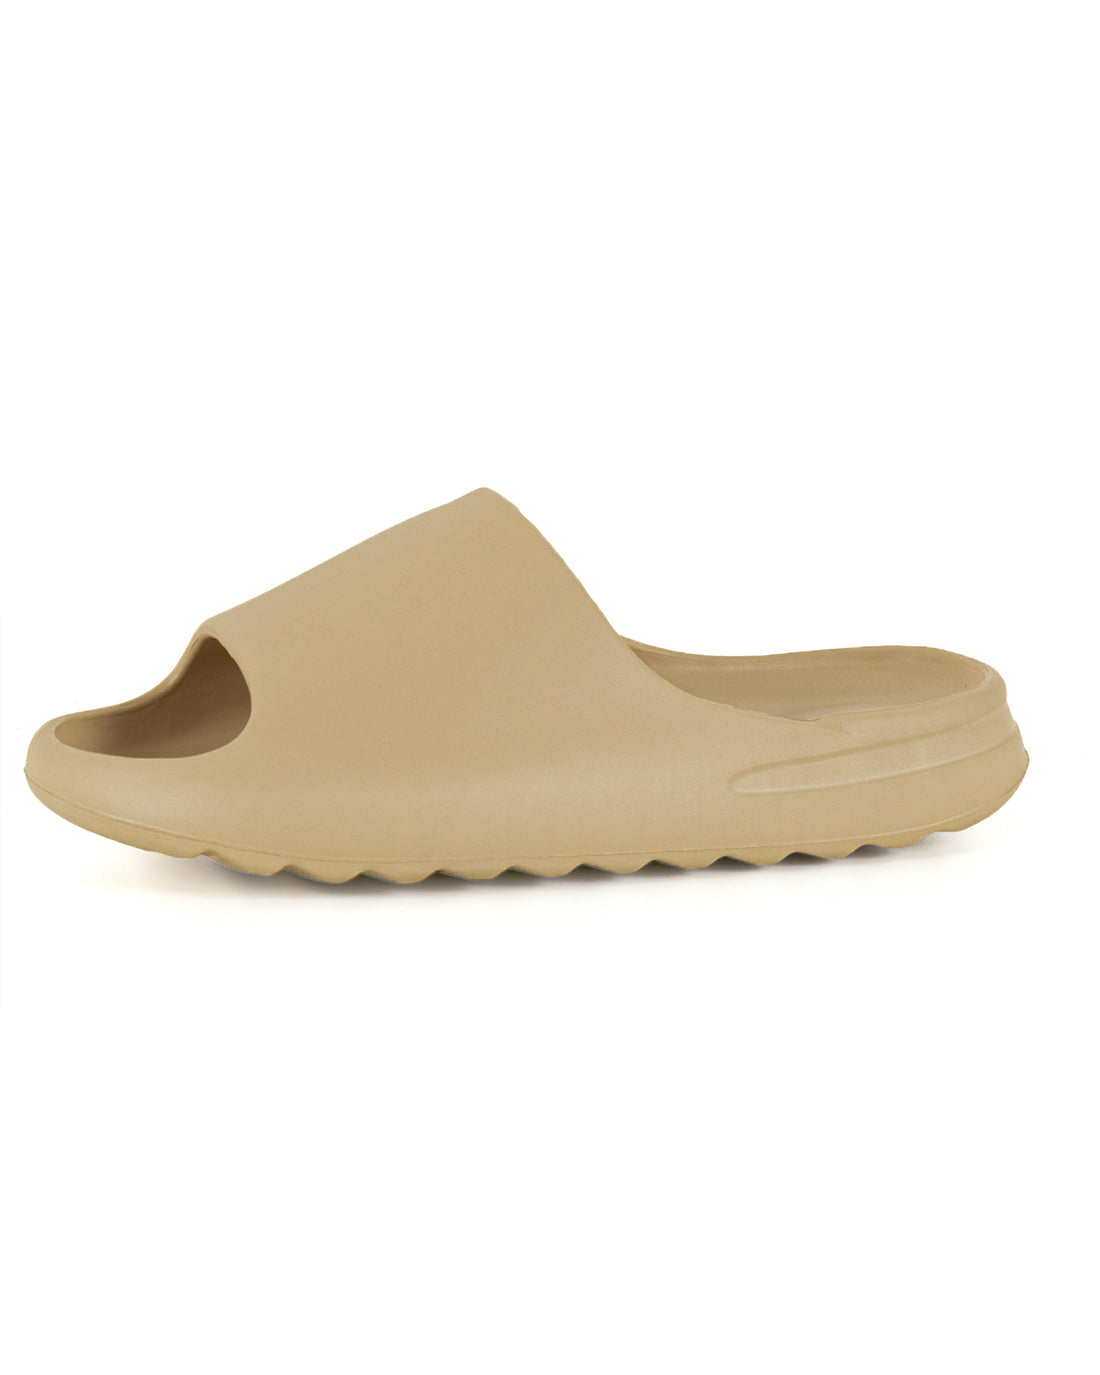 Unisex Men's Summer Rubber Slippers Sea Pool Solid Color Beige Non-slip Slippers GIOSAL-S1224A